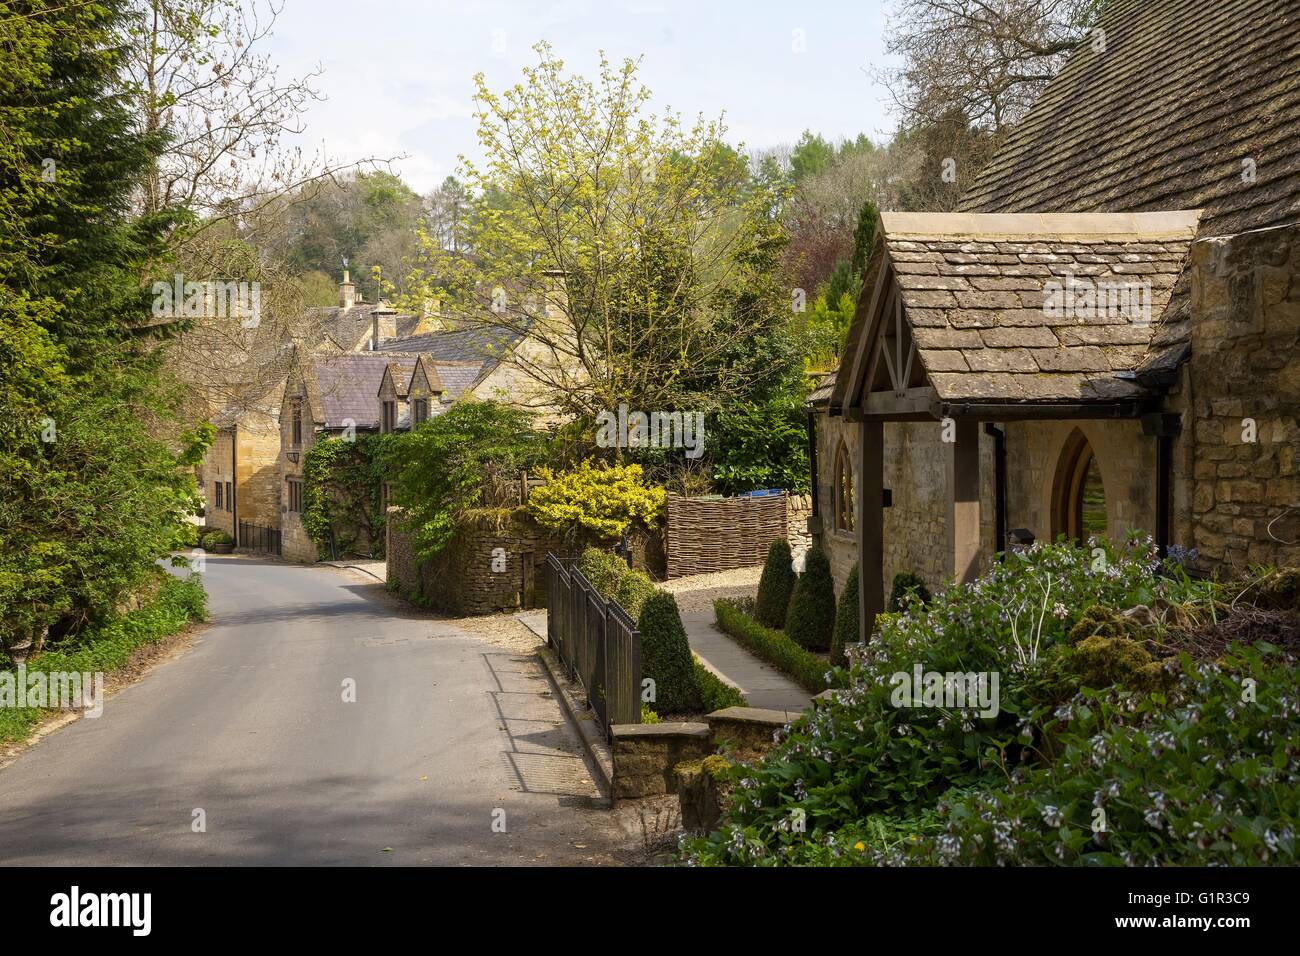 Chalets à Cotswold Snowshill, Gloucestershire, Angleterre Banque D'Images